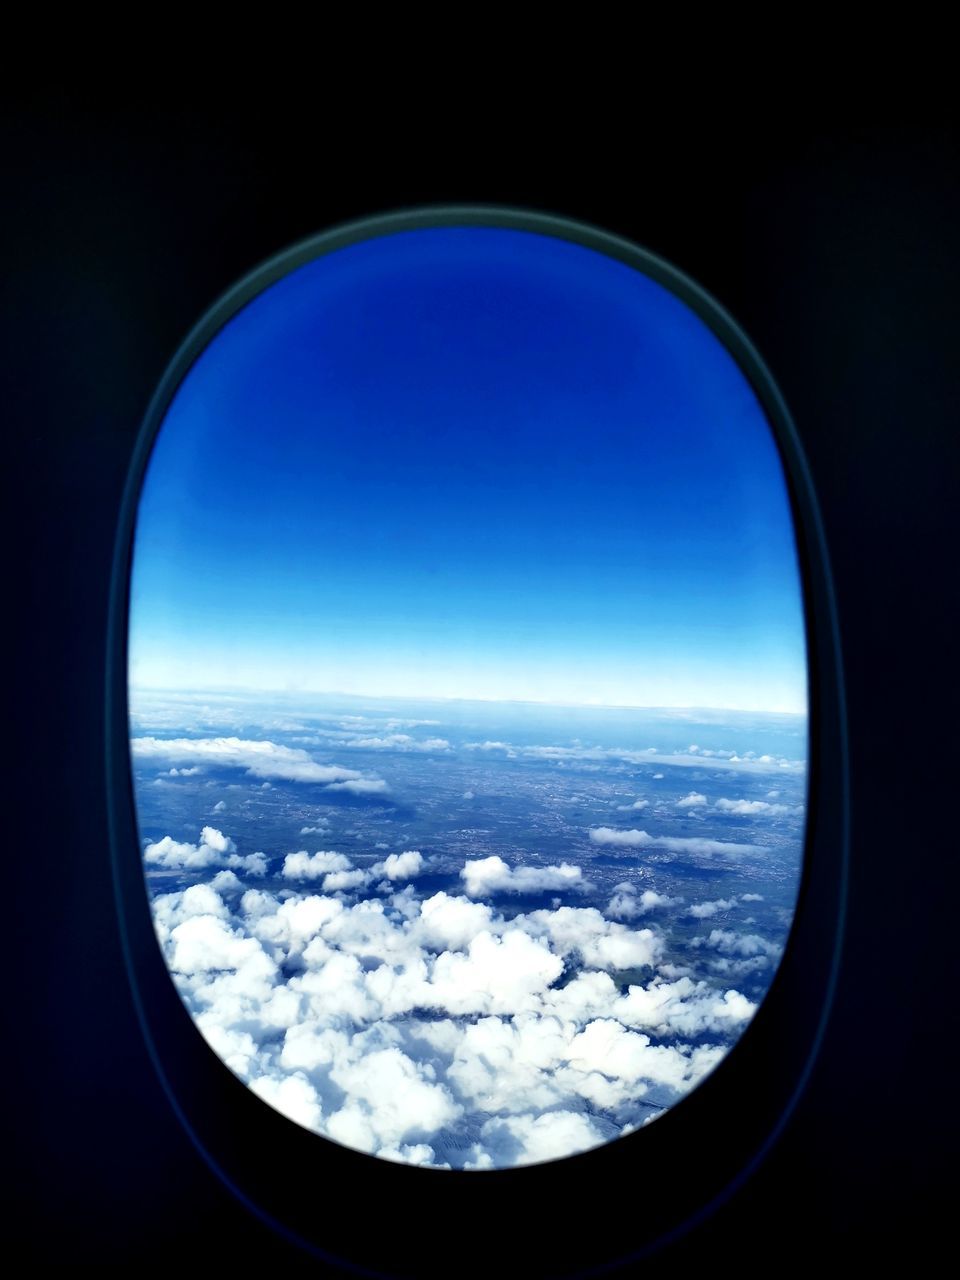 sky, blue, cloud, window, earth, airplane, reflection, nature, air vehicle, scenics - nature, aerial view, no people, travel, flying, beauty in nature, planet, horizon, transportation, environment, glass, outdoors, cloudscape, outer space, snow, light, mode of transportation, cold temperature, copy space, urban skyline, geometric shape, atmosphere, winter, landscape, space, day